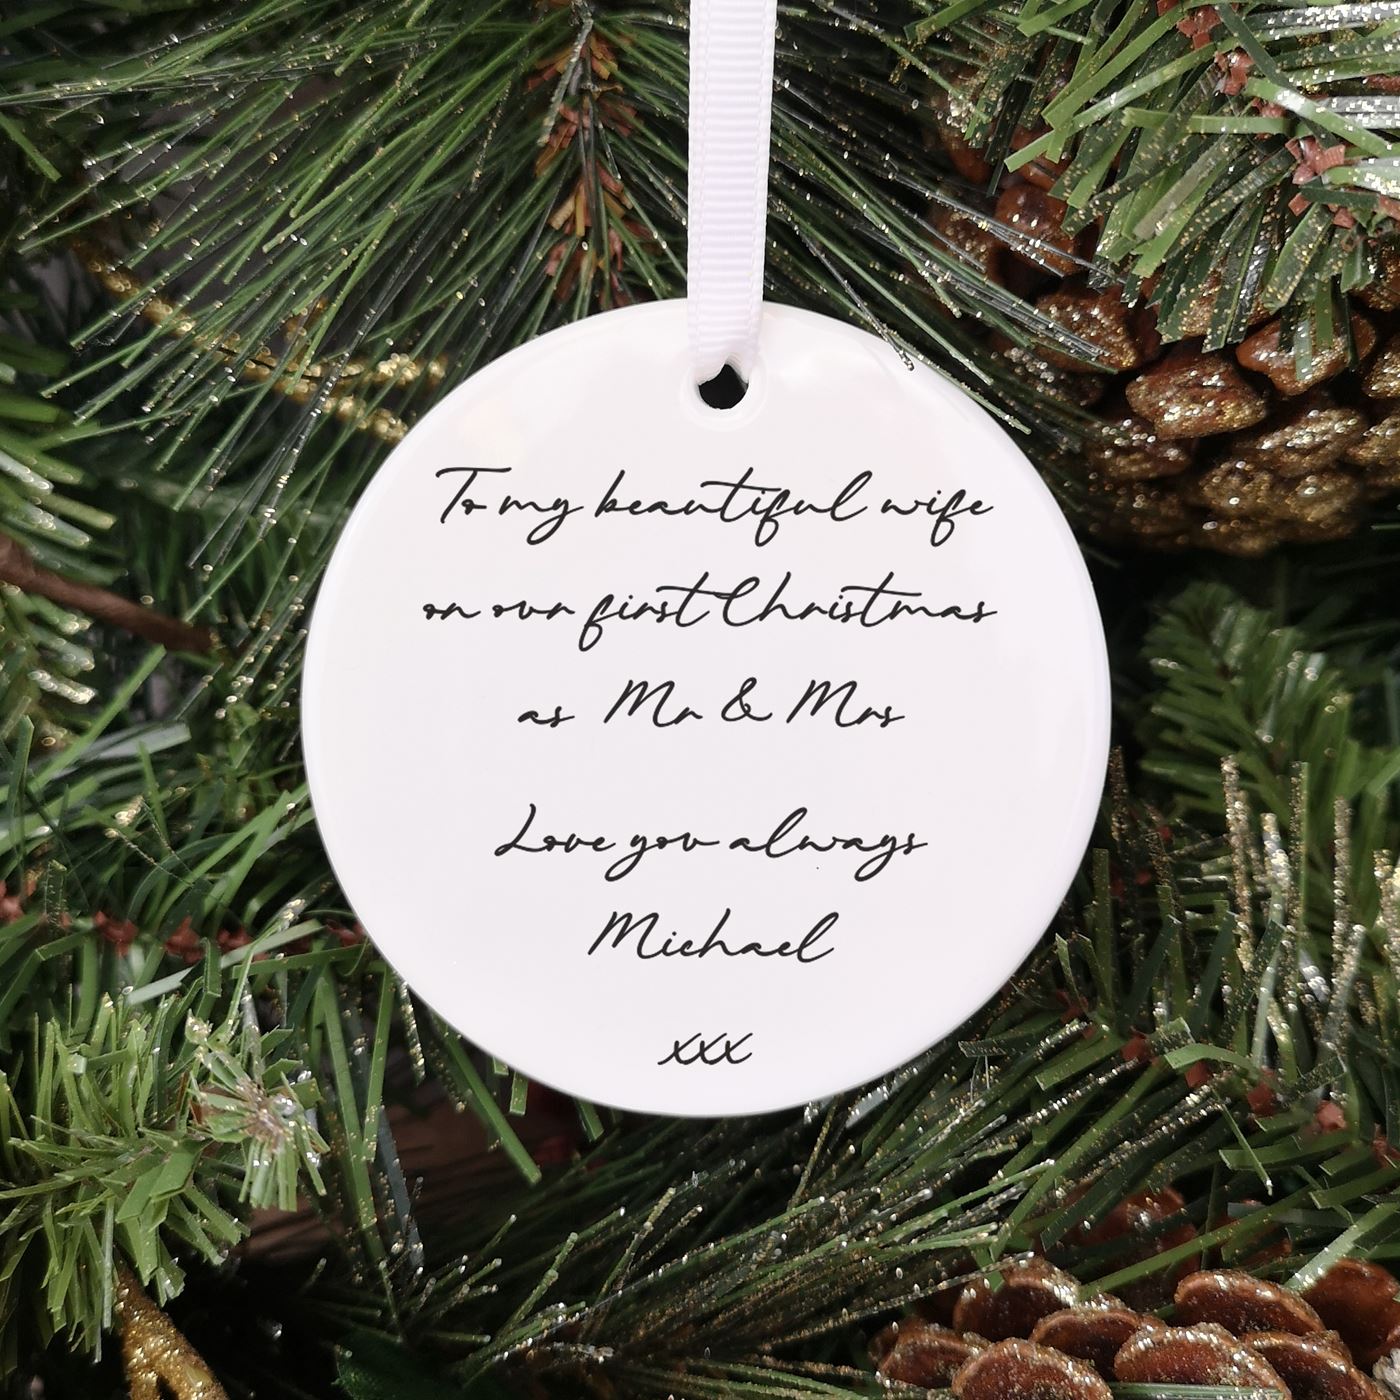 Personalised Ceramic First Christmas Married Bauble - Wreath